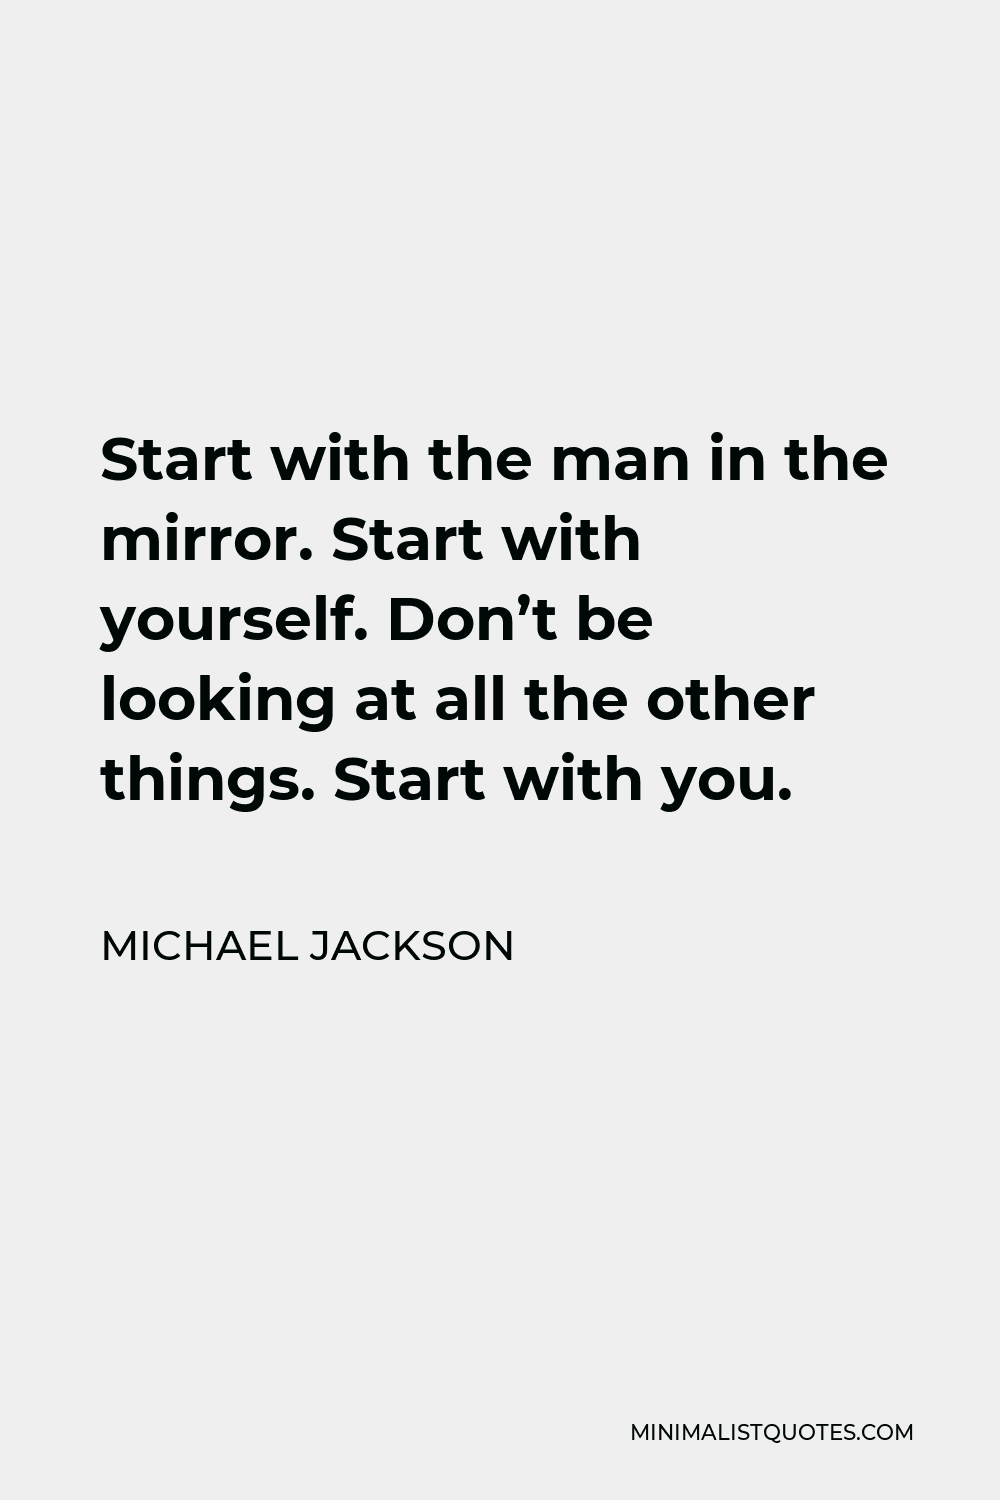 Michael Jackson Quote - Start with the man in the mirror. Start with yourself. Don’t be looking at all the other things. Start with you.